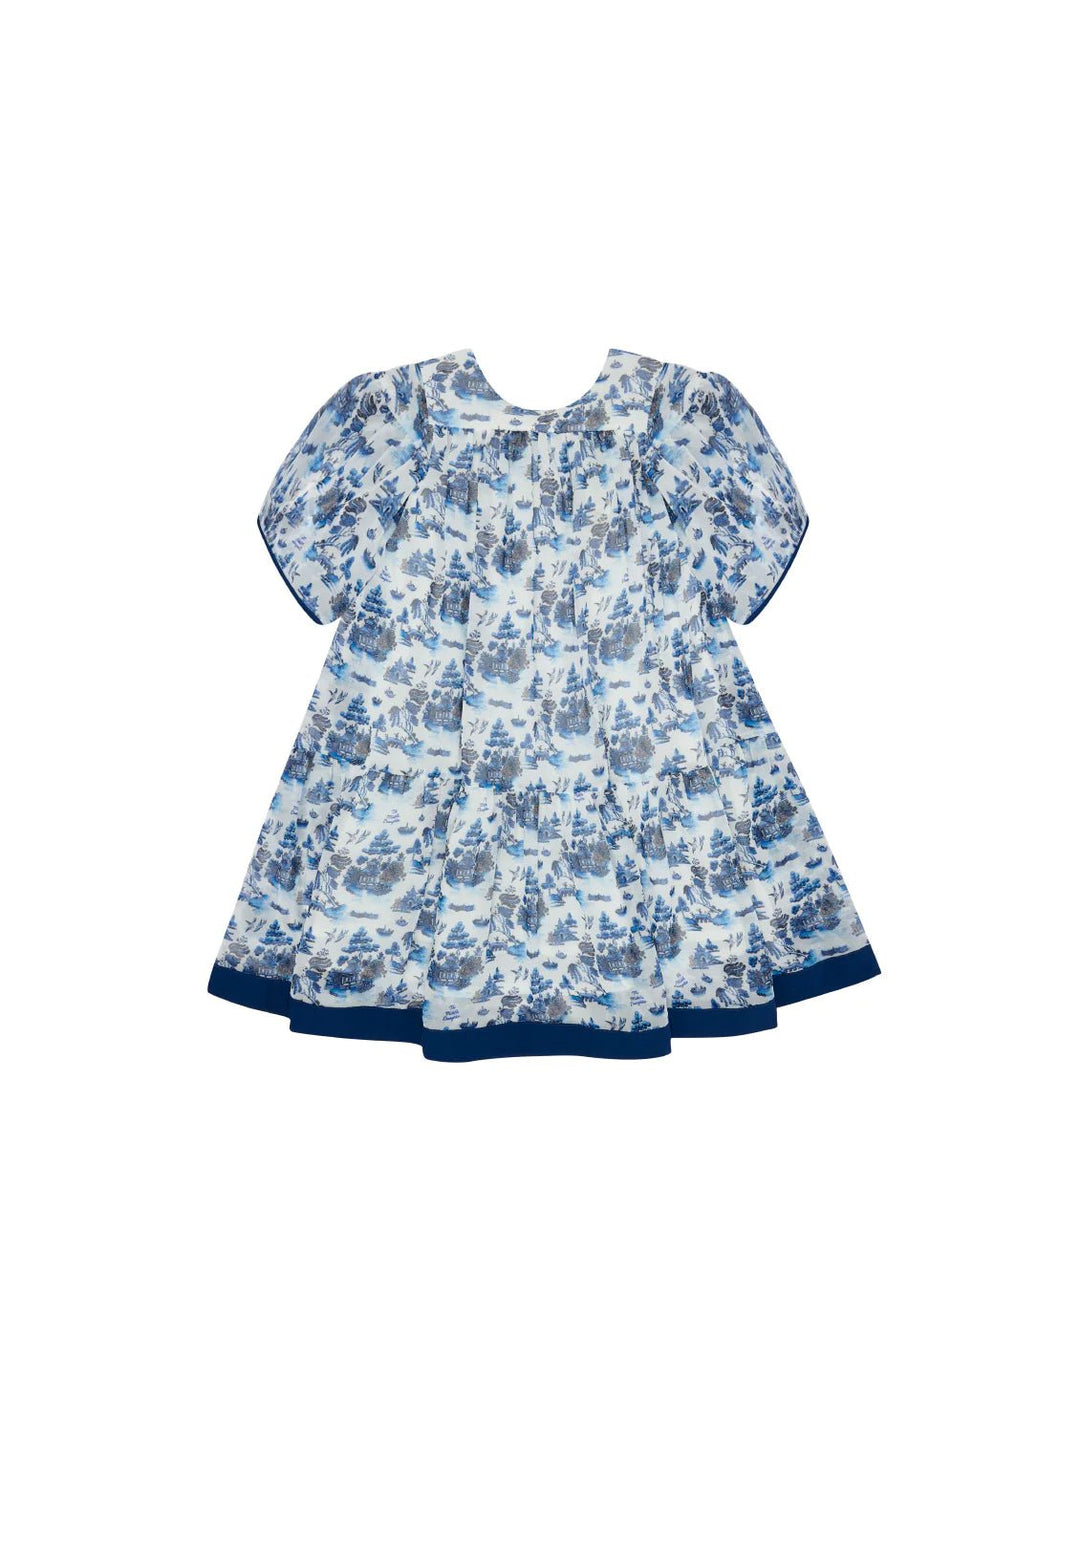 Chiffon voluminous dress in our own developed print with contrast - Willow Pattern - Posh New York